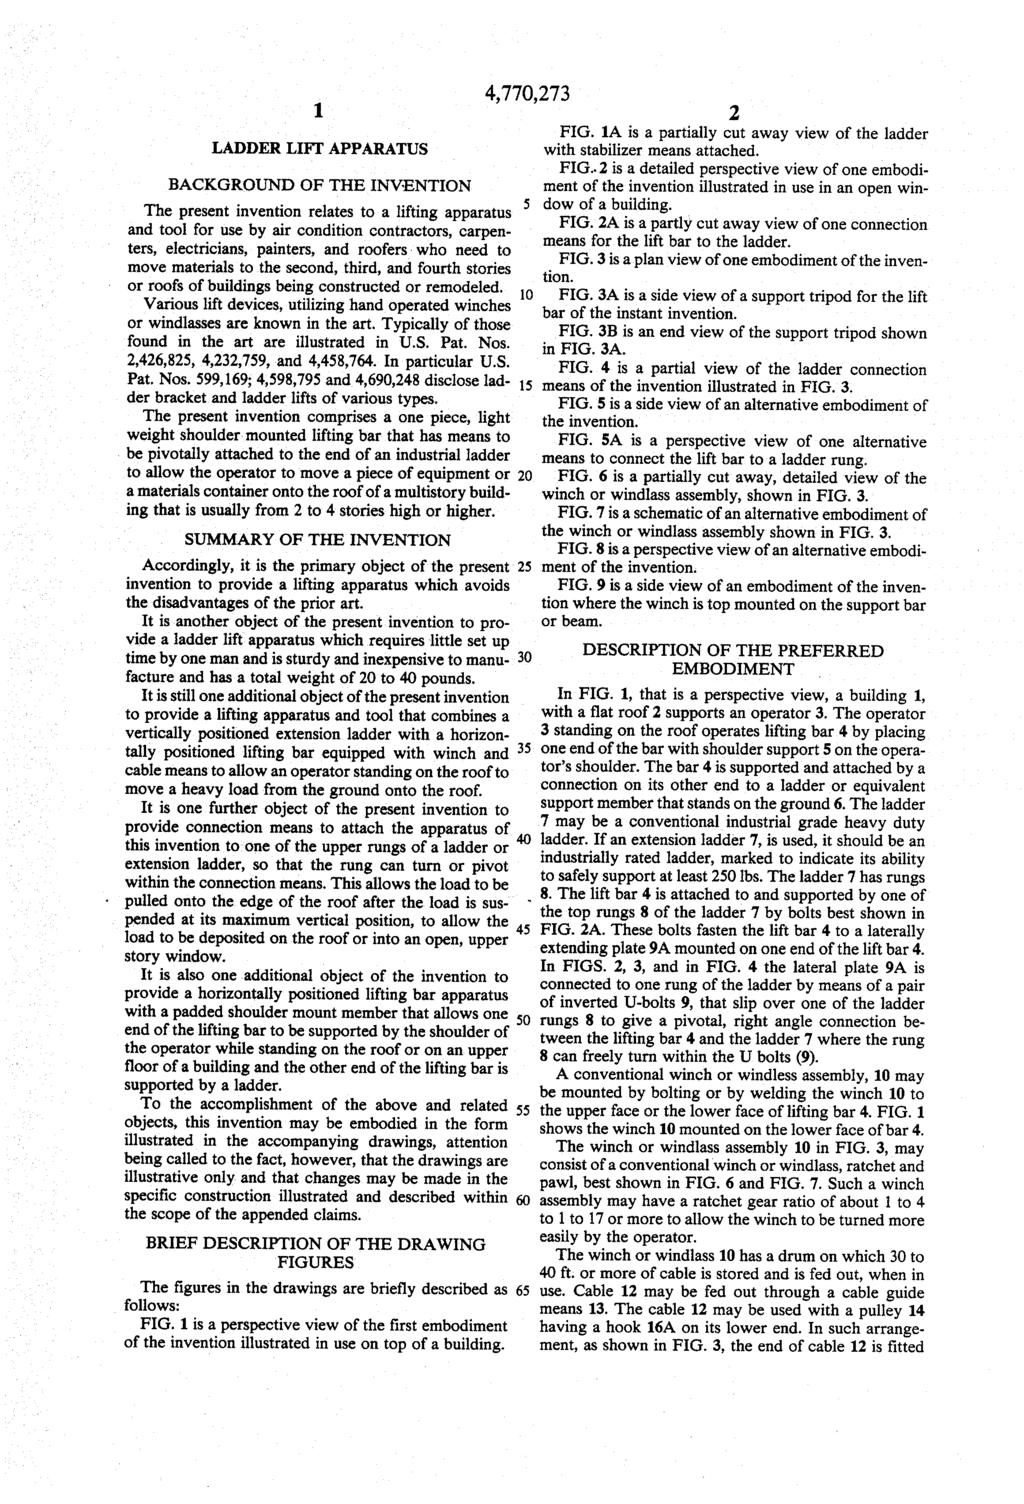 1 LADDER LIFT APPARATUS BACKGROUND OF THE INVENTION The present invention relates to a lifting apparatus and tool for use by air condition contractors, carpen ters, electricians, painters, and